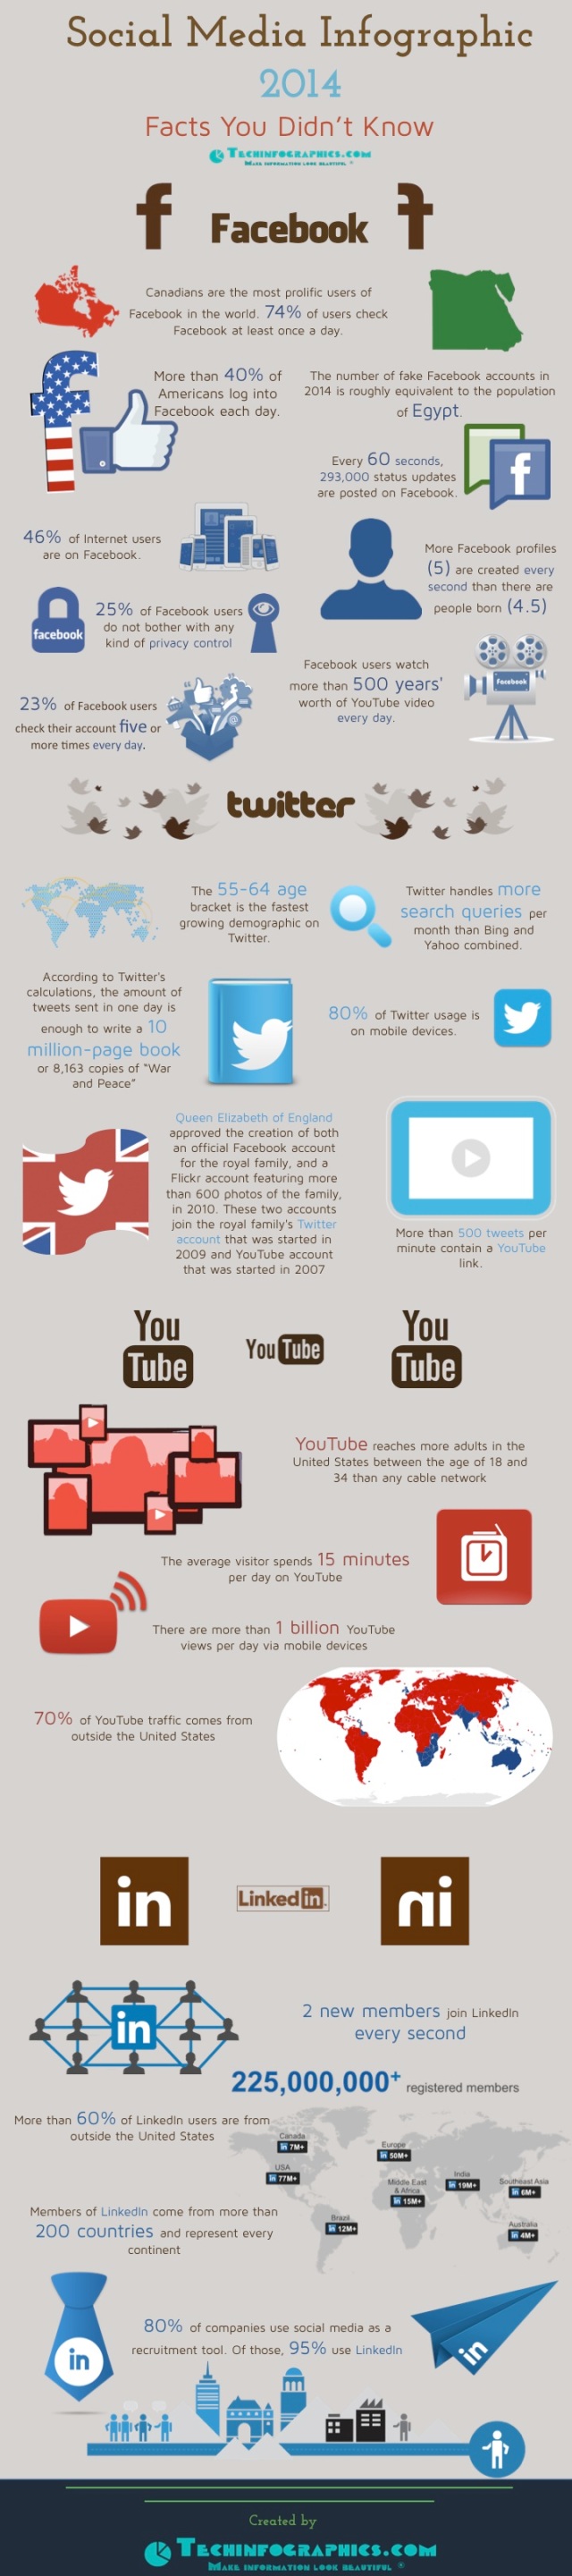 Social Media Infographic 2014 - Facts You Didn't Know